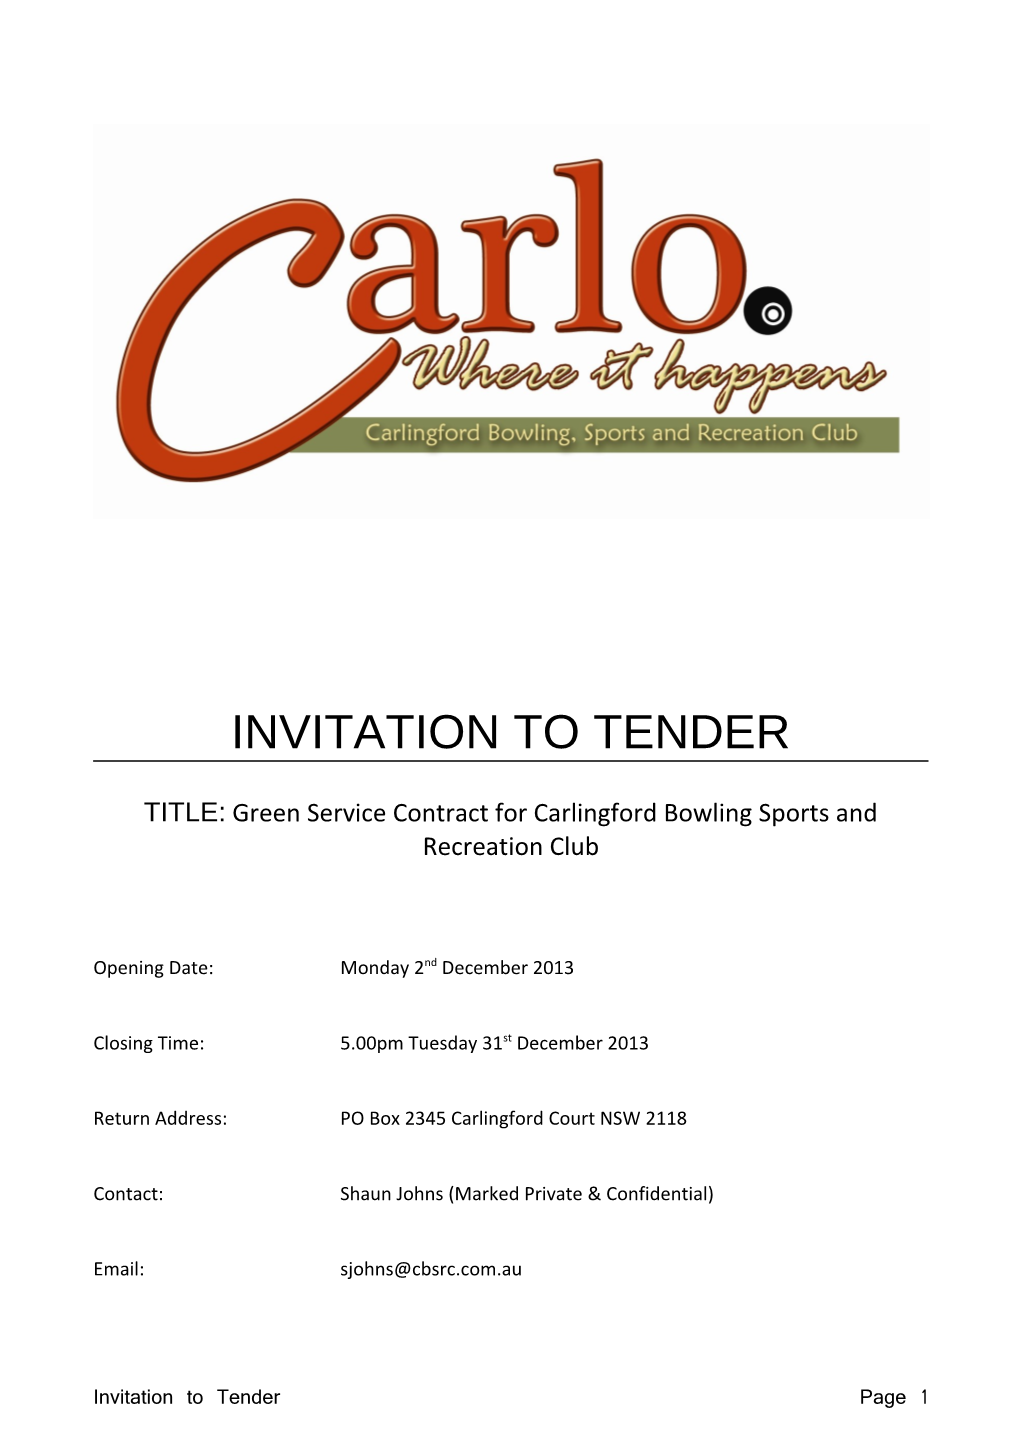 TITLE: Green Service Contract for Carlingford Bowling Sports and Recreation Club